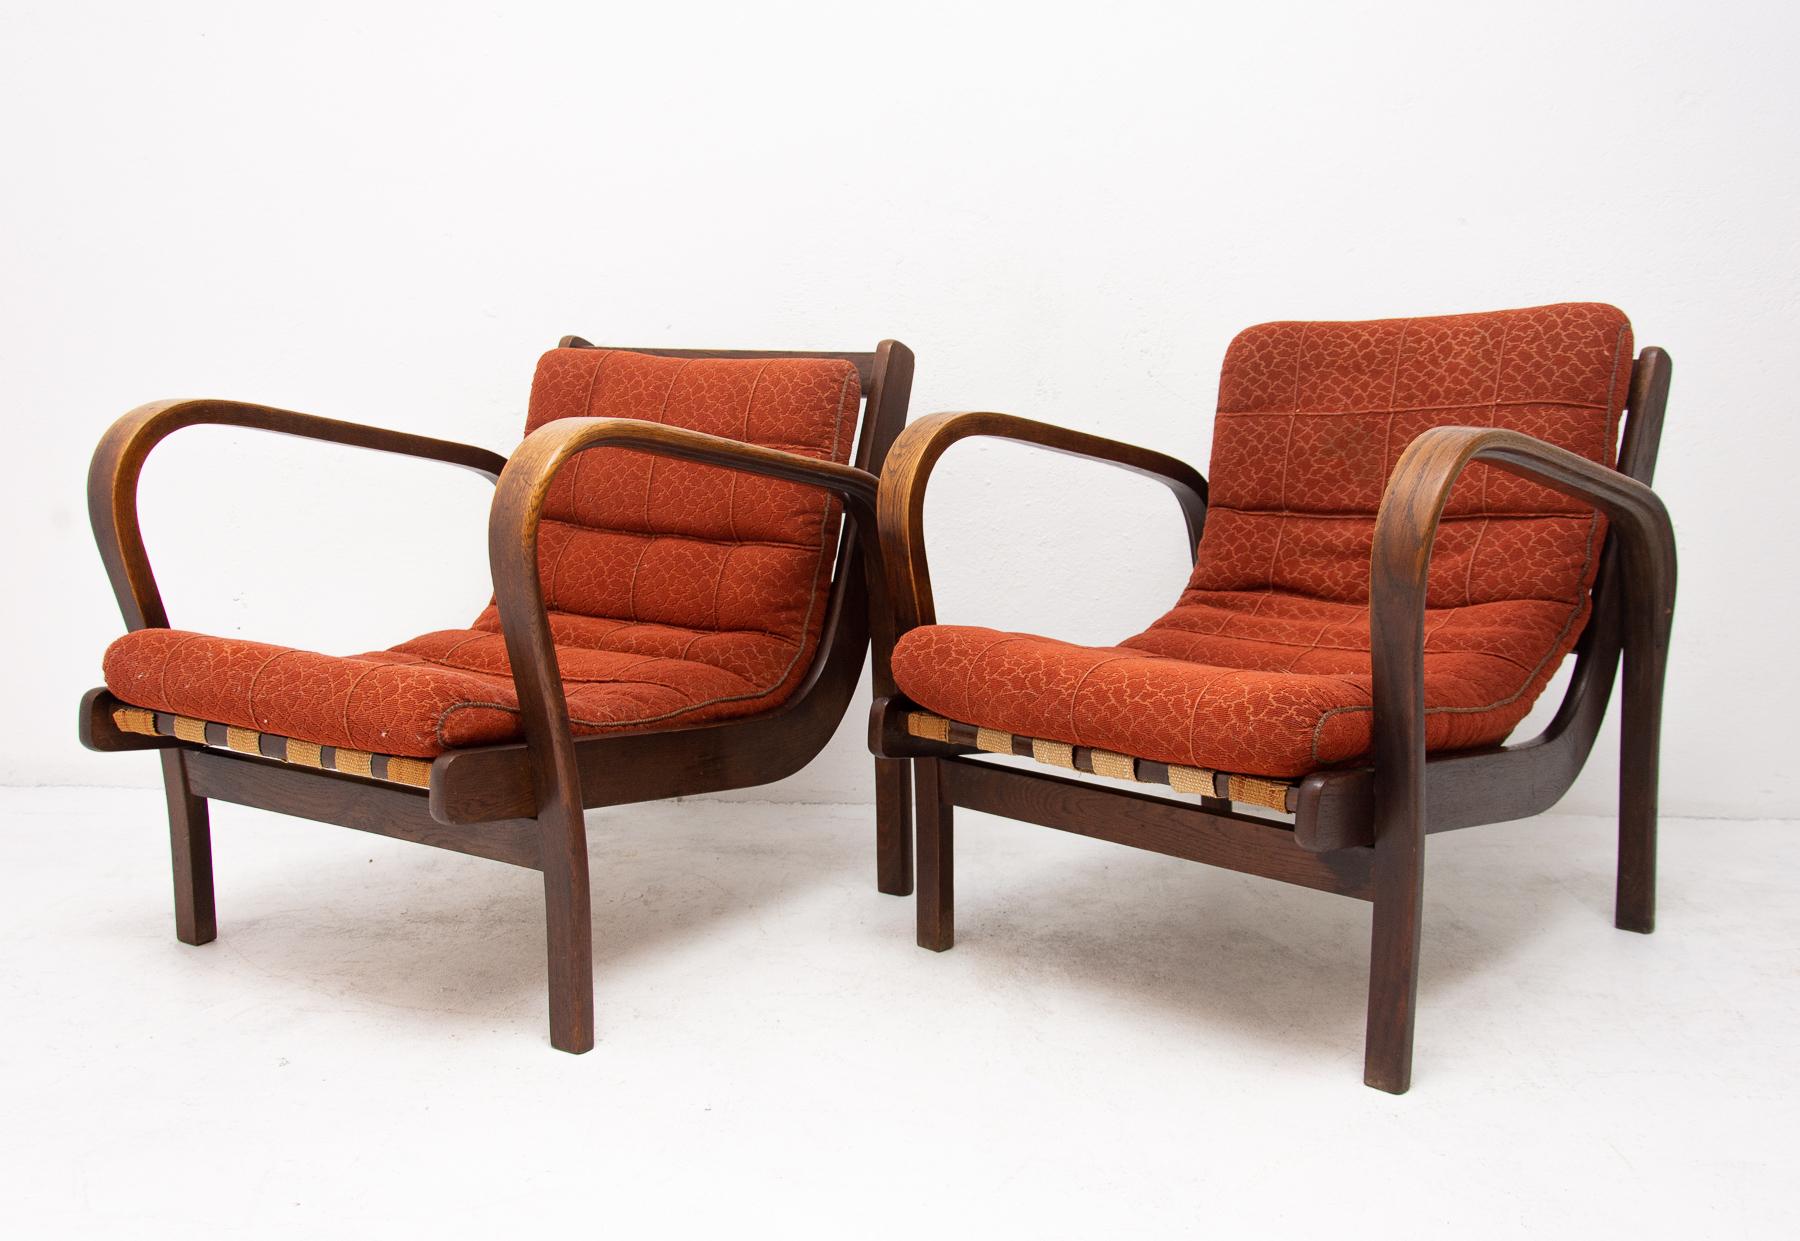 Czech Midcentury Armchairs by Kropacek and Kozelka for Interier Praha 1944, Set of Two